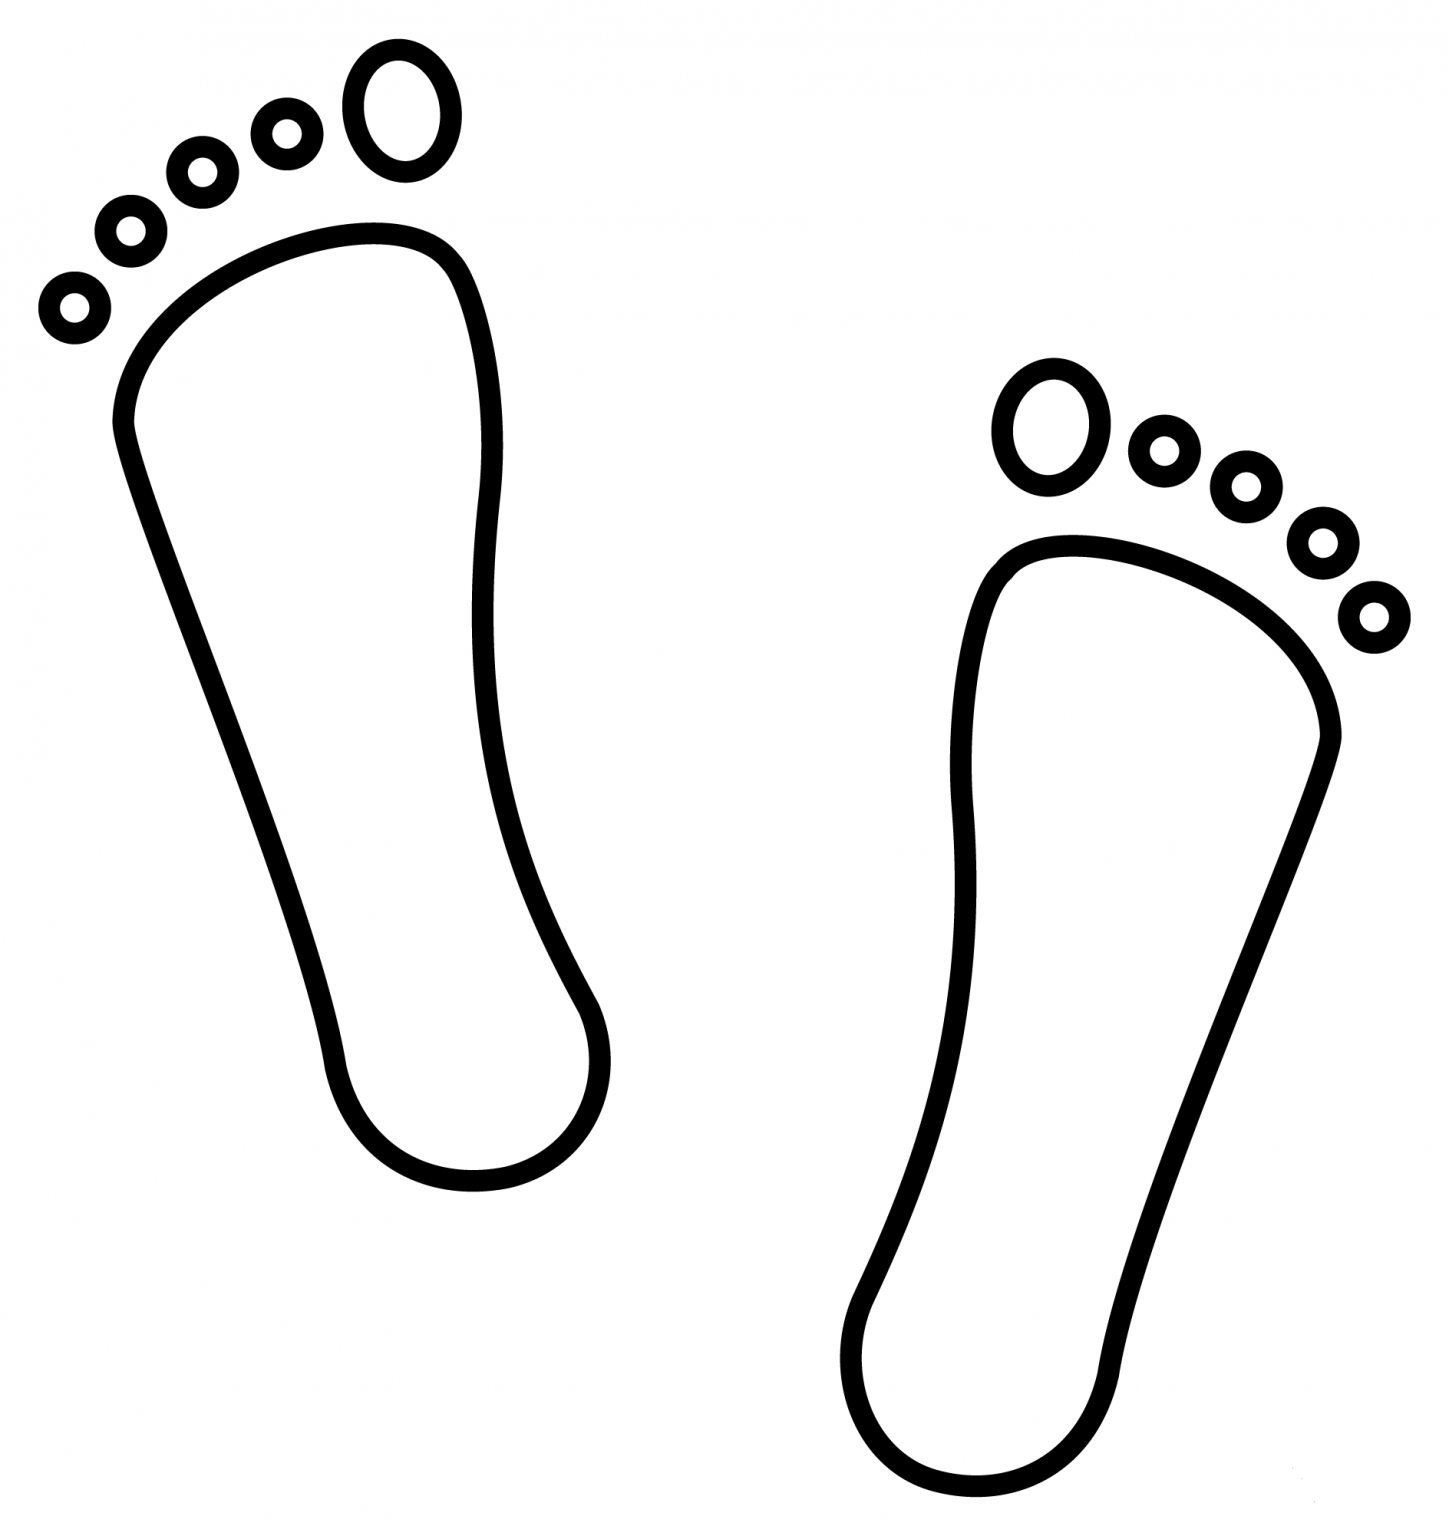 Footprints Emoji coloring page - ColouringPages